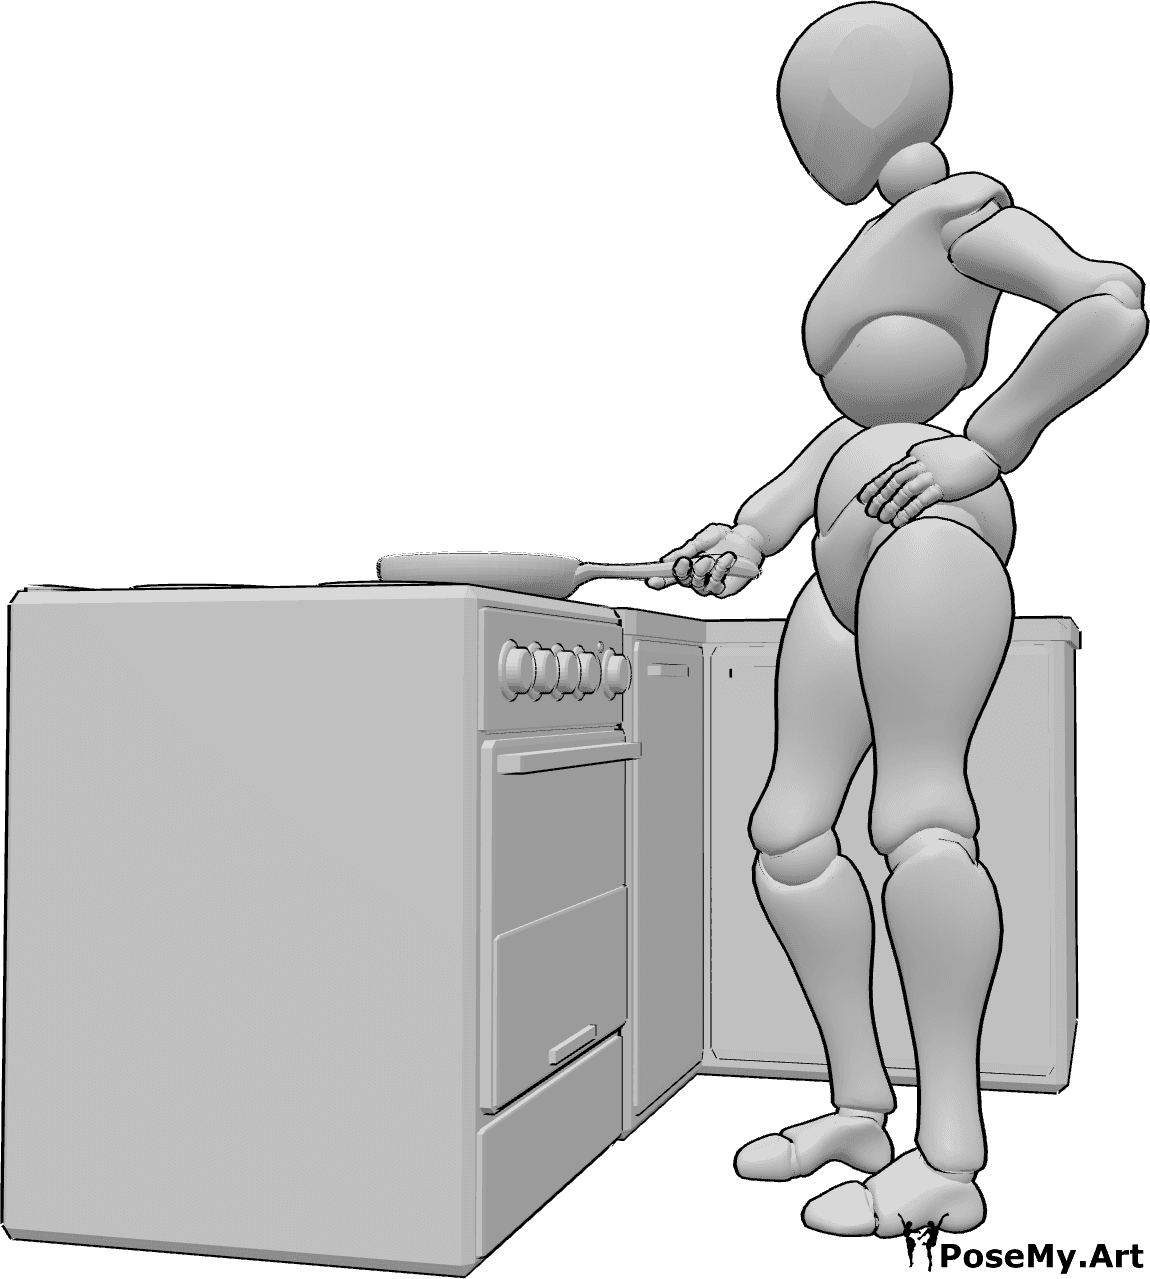 Pose Reference- Female cooking pose - Female is standing in the kitchen, cooking, holding a pan in her right hand